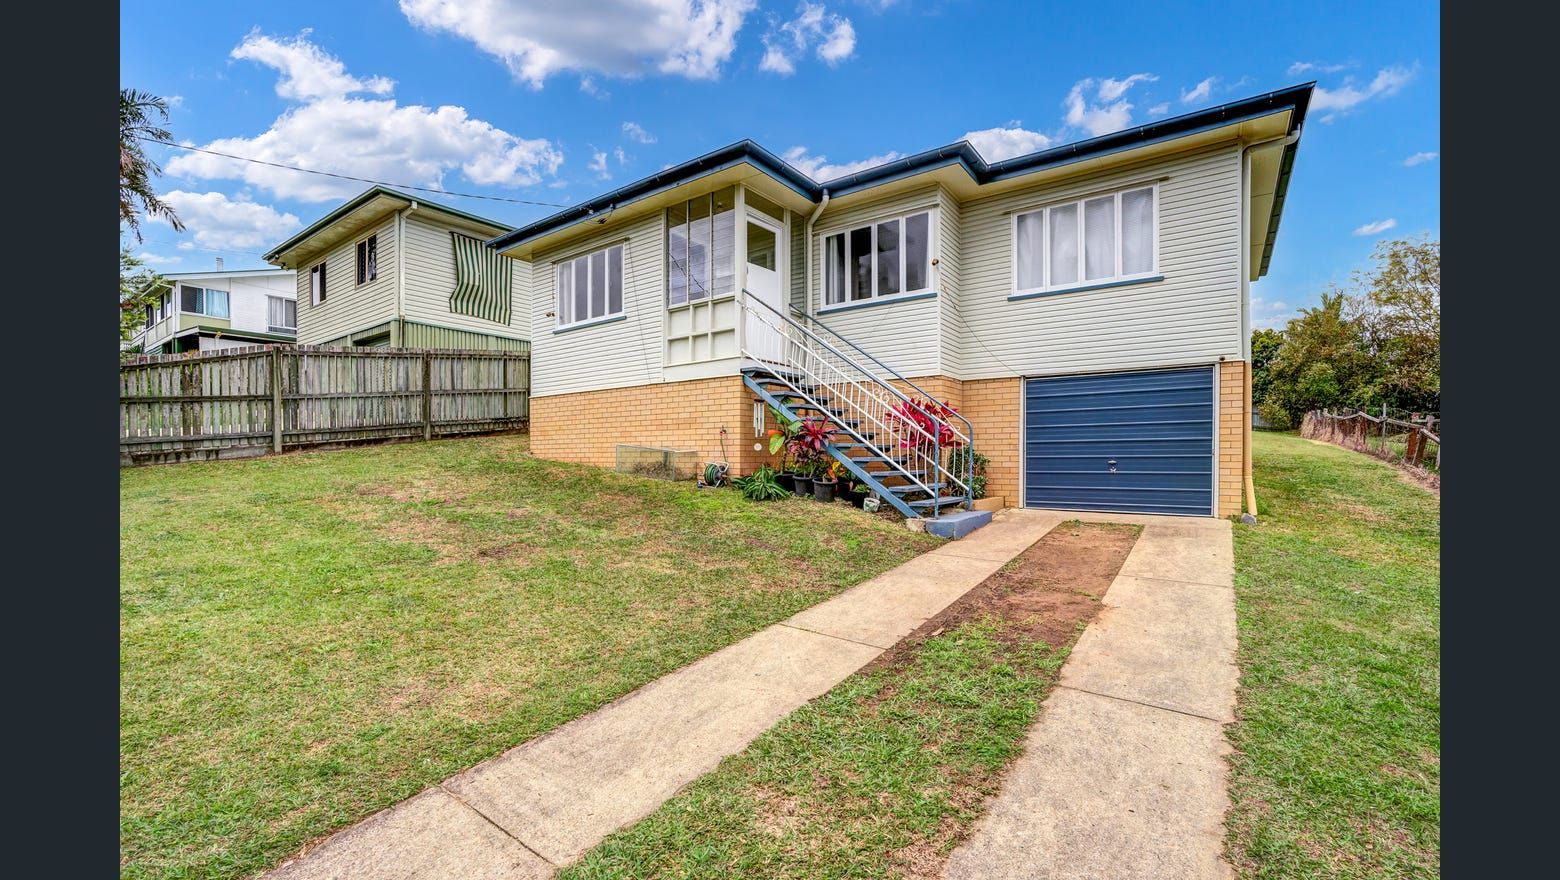 3 bedrooms House in 18 Tozer Park Road GYMPIE QLD, 4570